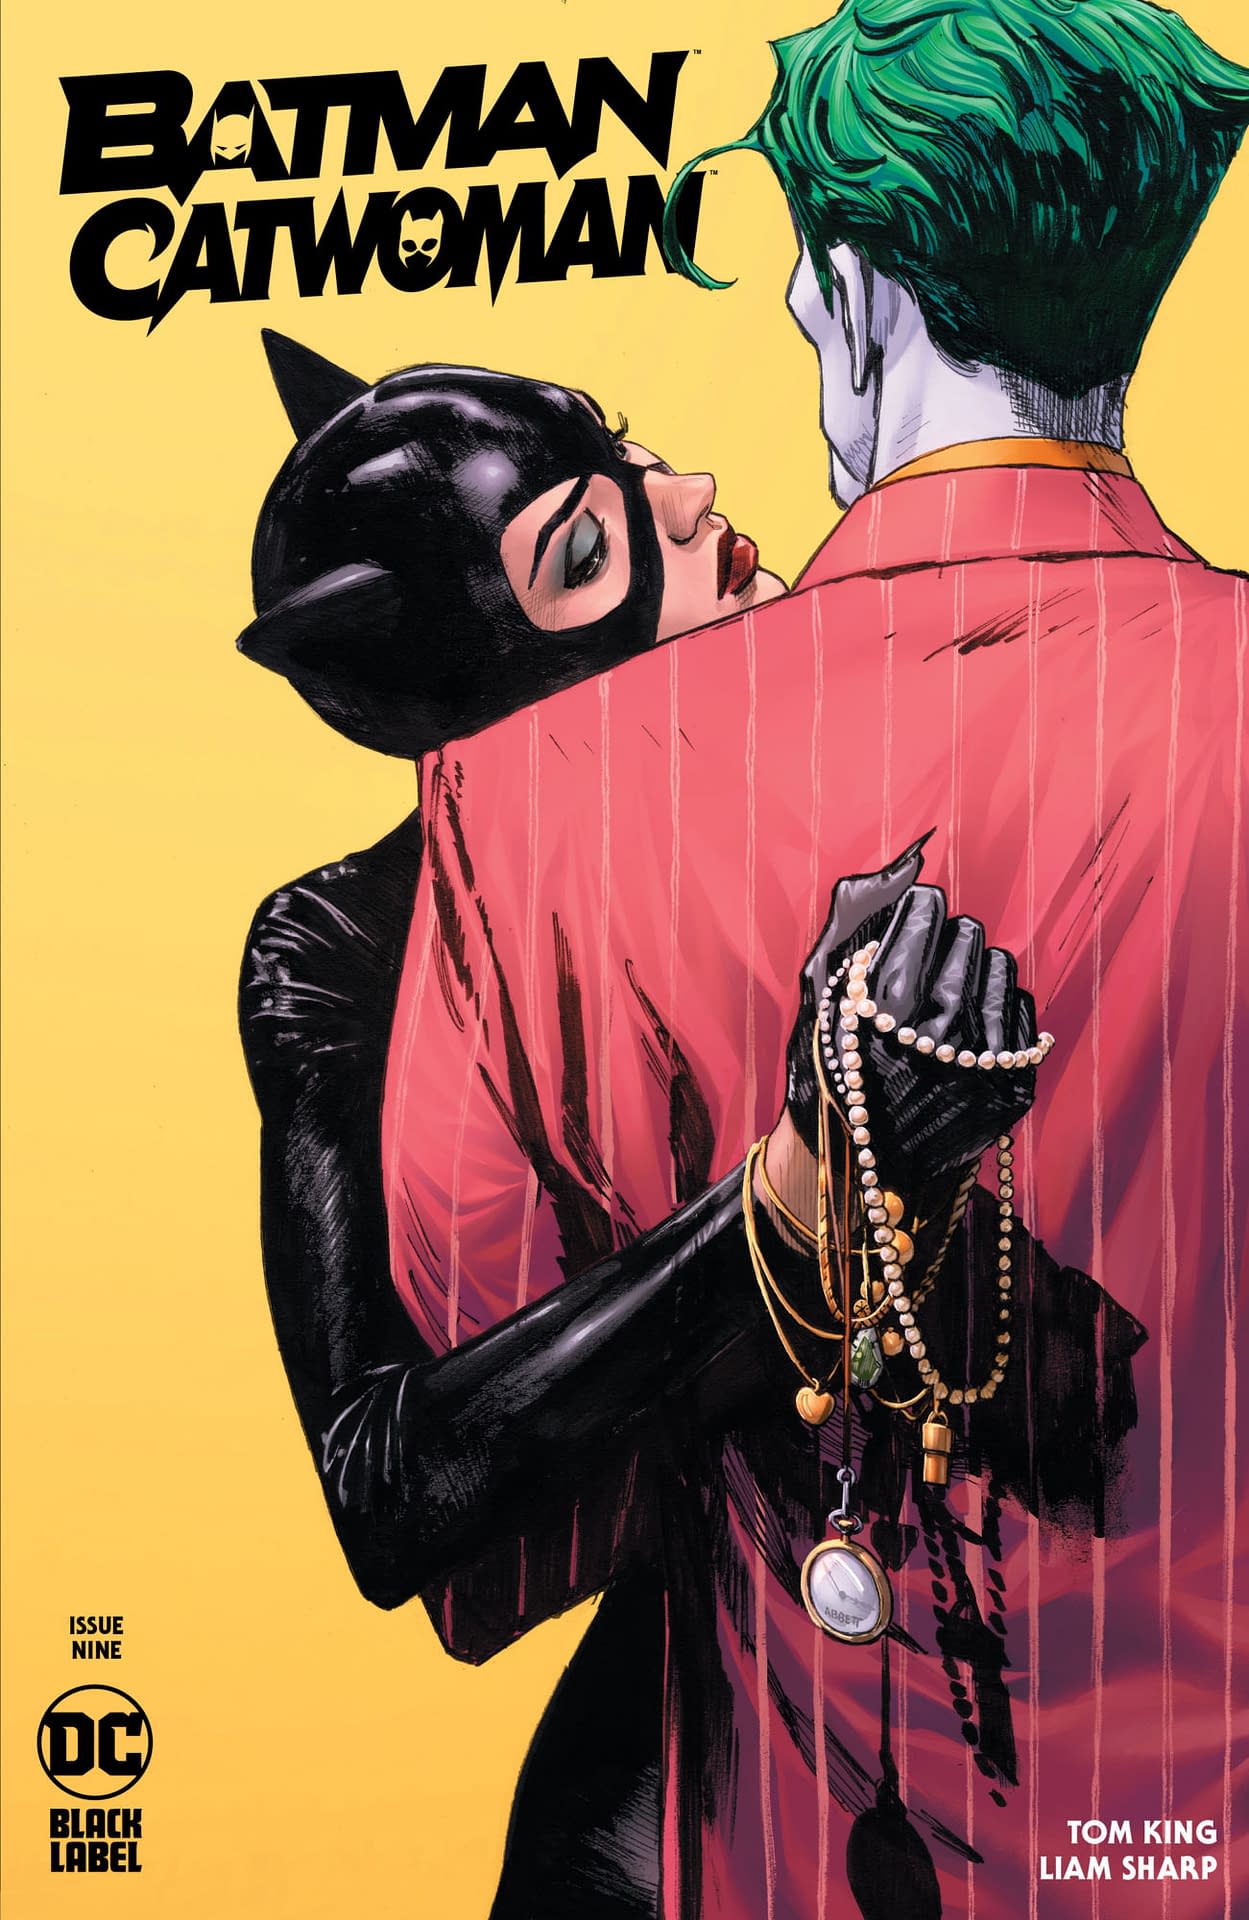 Batman/Catwoman #9 Preview: The Sexy Penguin Scene You Demanded